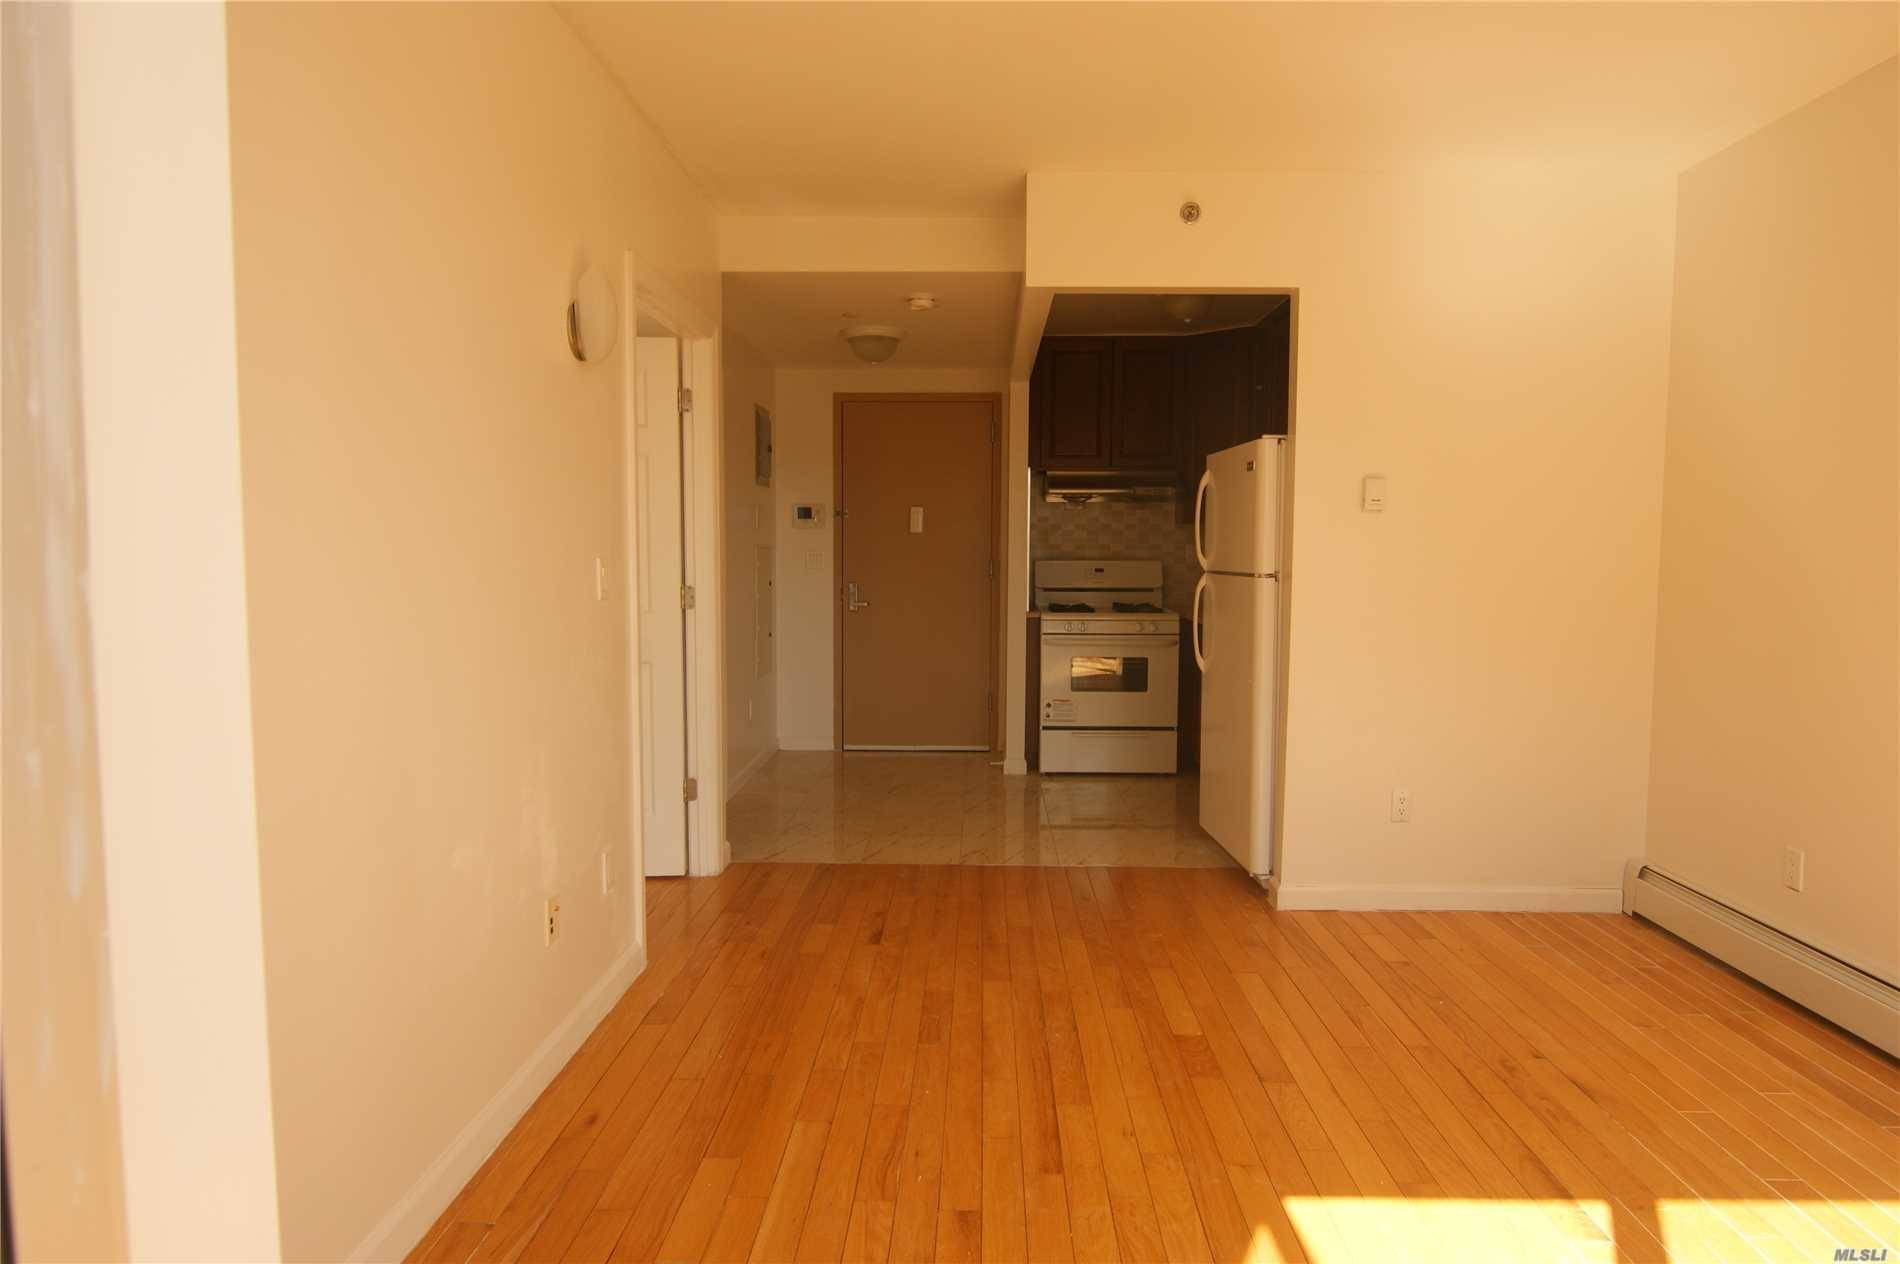 1Bed 2 year old sunny aparment With Balcony, facing south, Located At Prime Location Of Flushing.